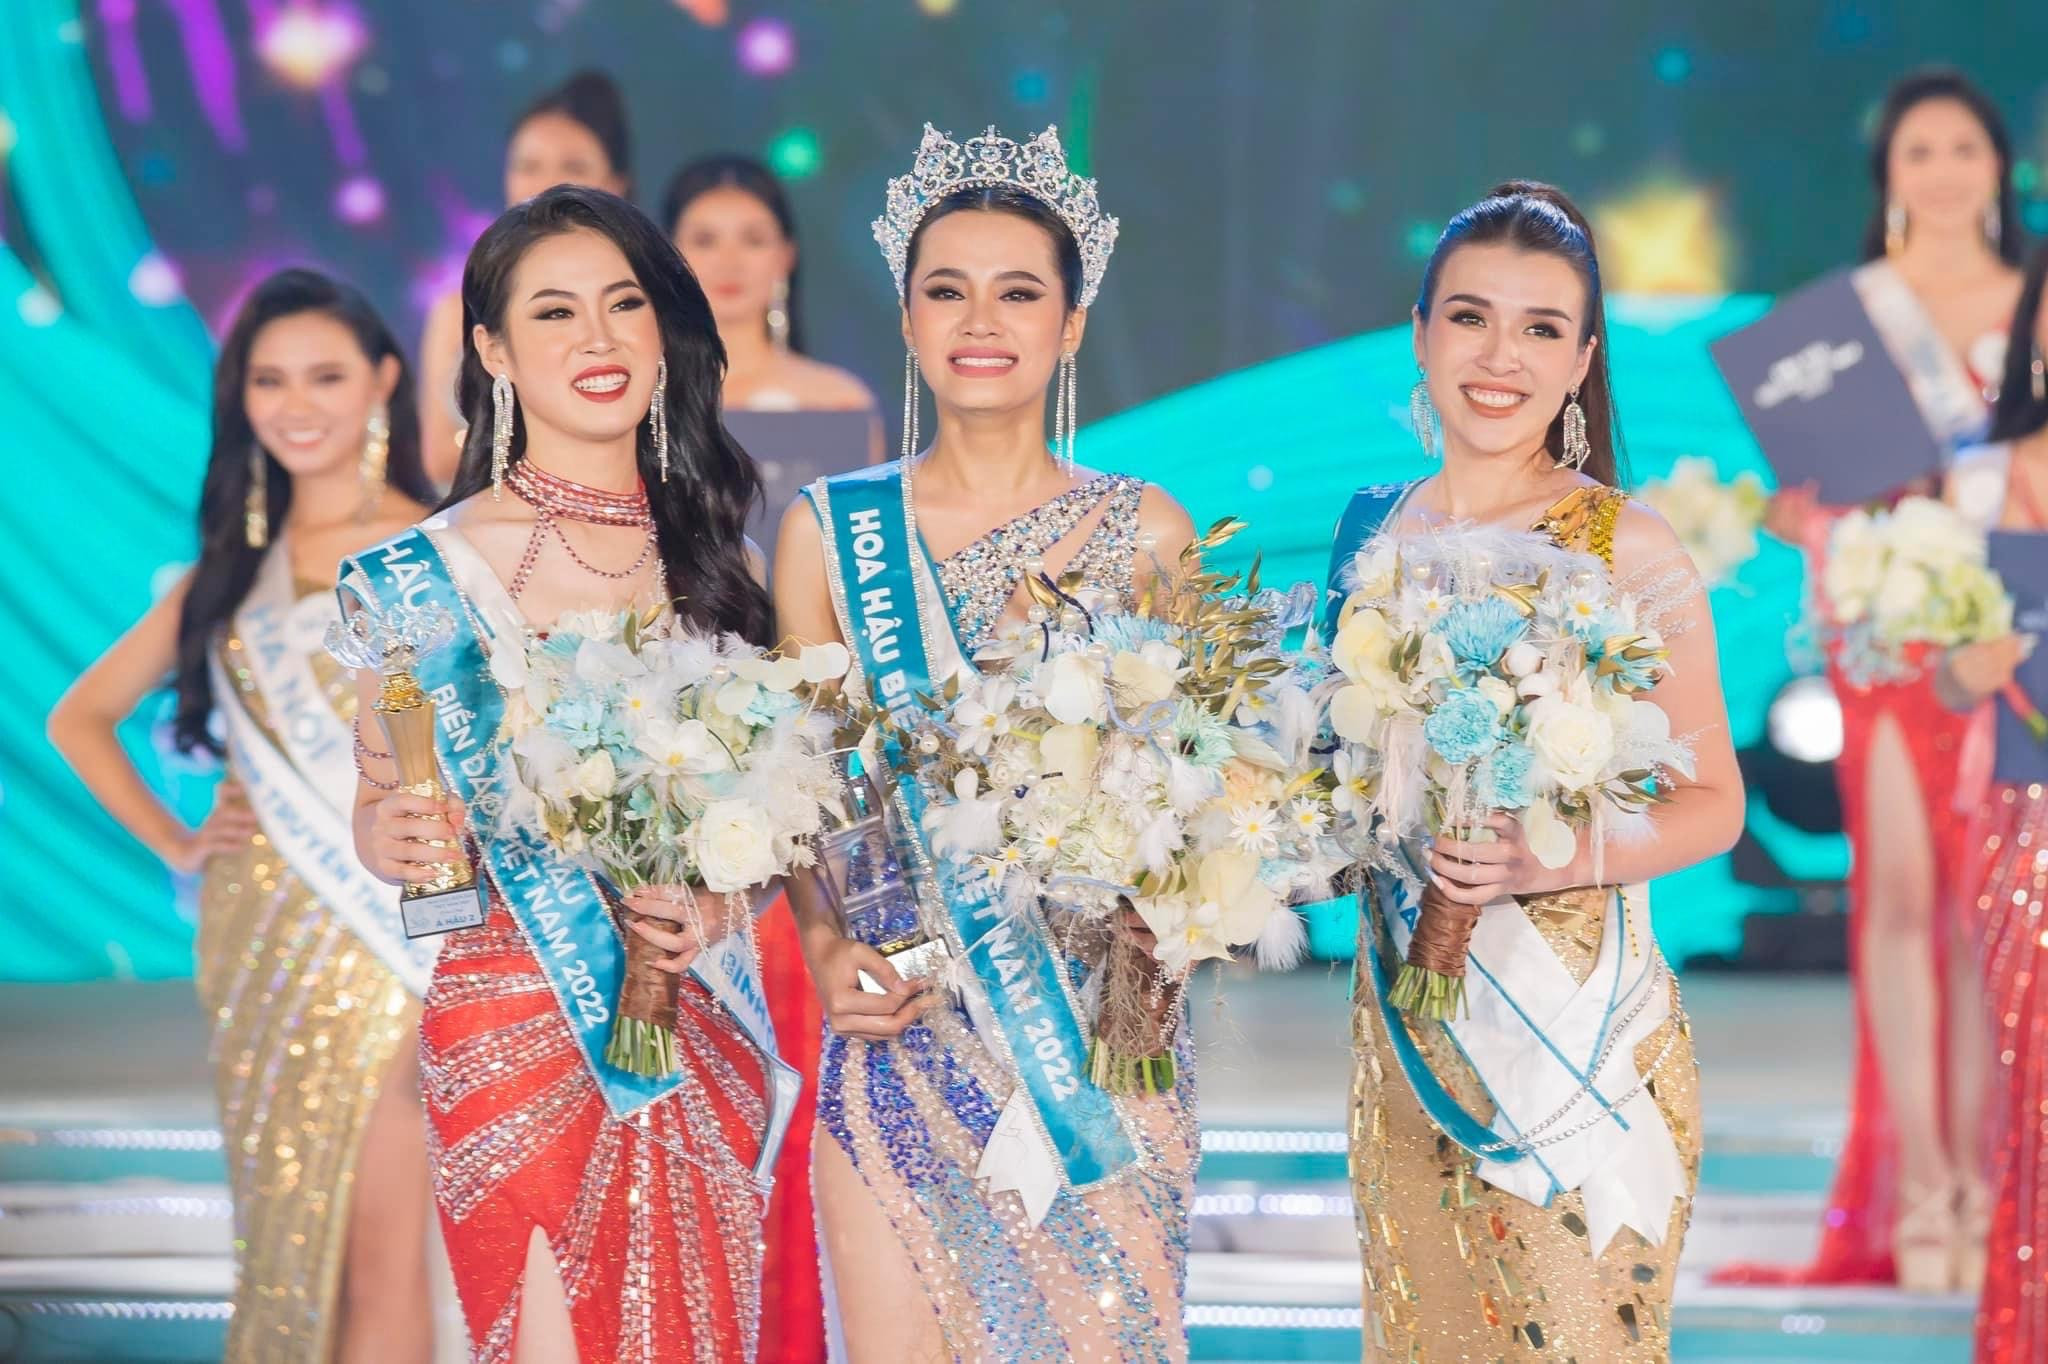 Two beauty queens named in one night: What is the aesthetic value?